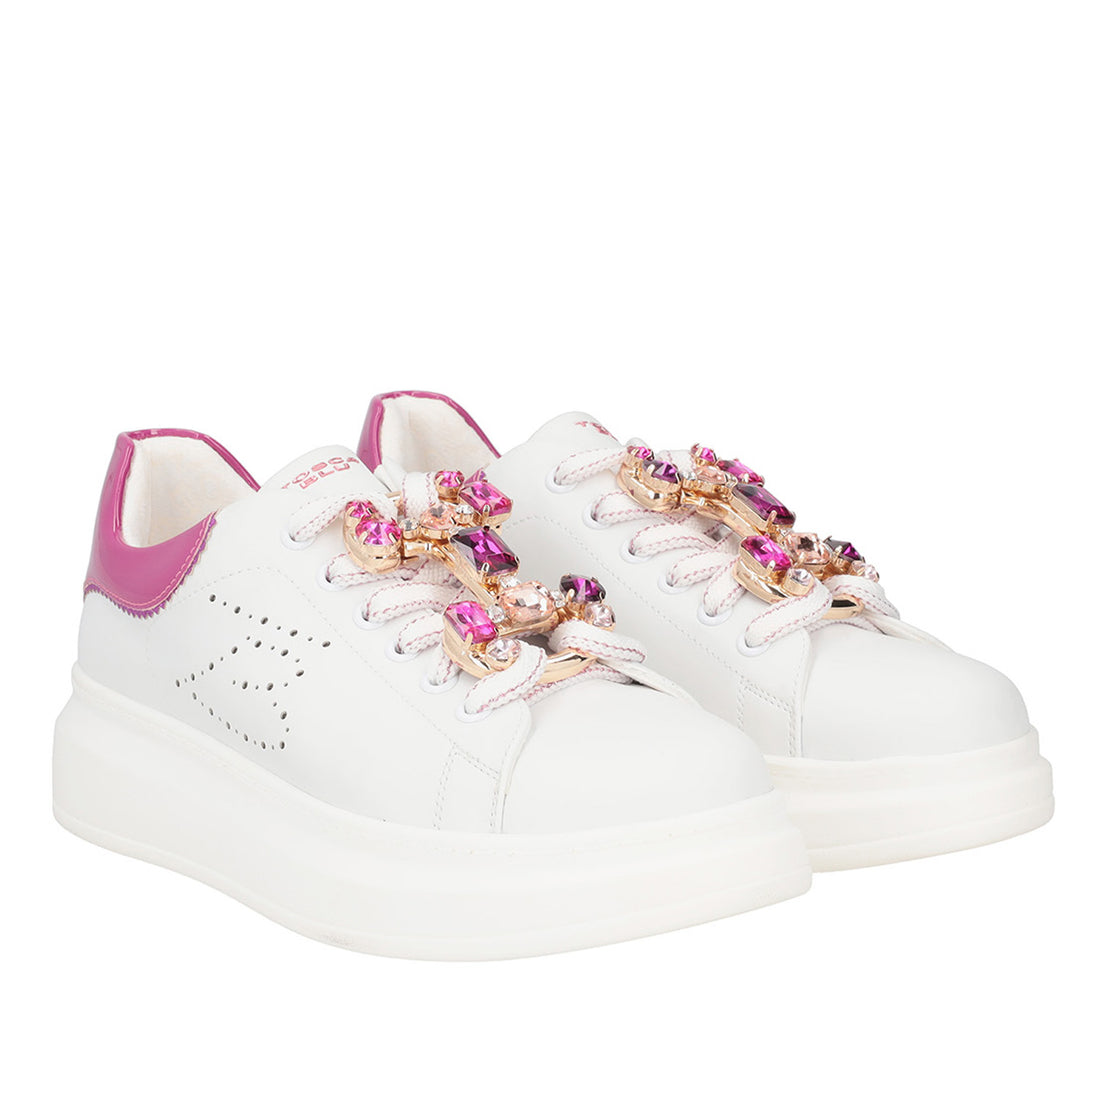 WHITE/FUXIA GLAMOUR SNEAKER WITH JEWEL ACCESSORY